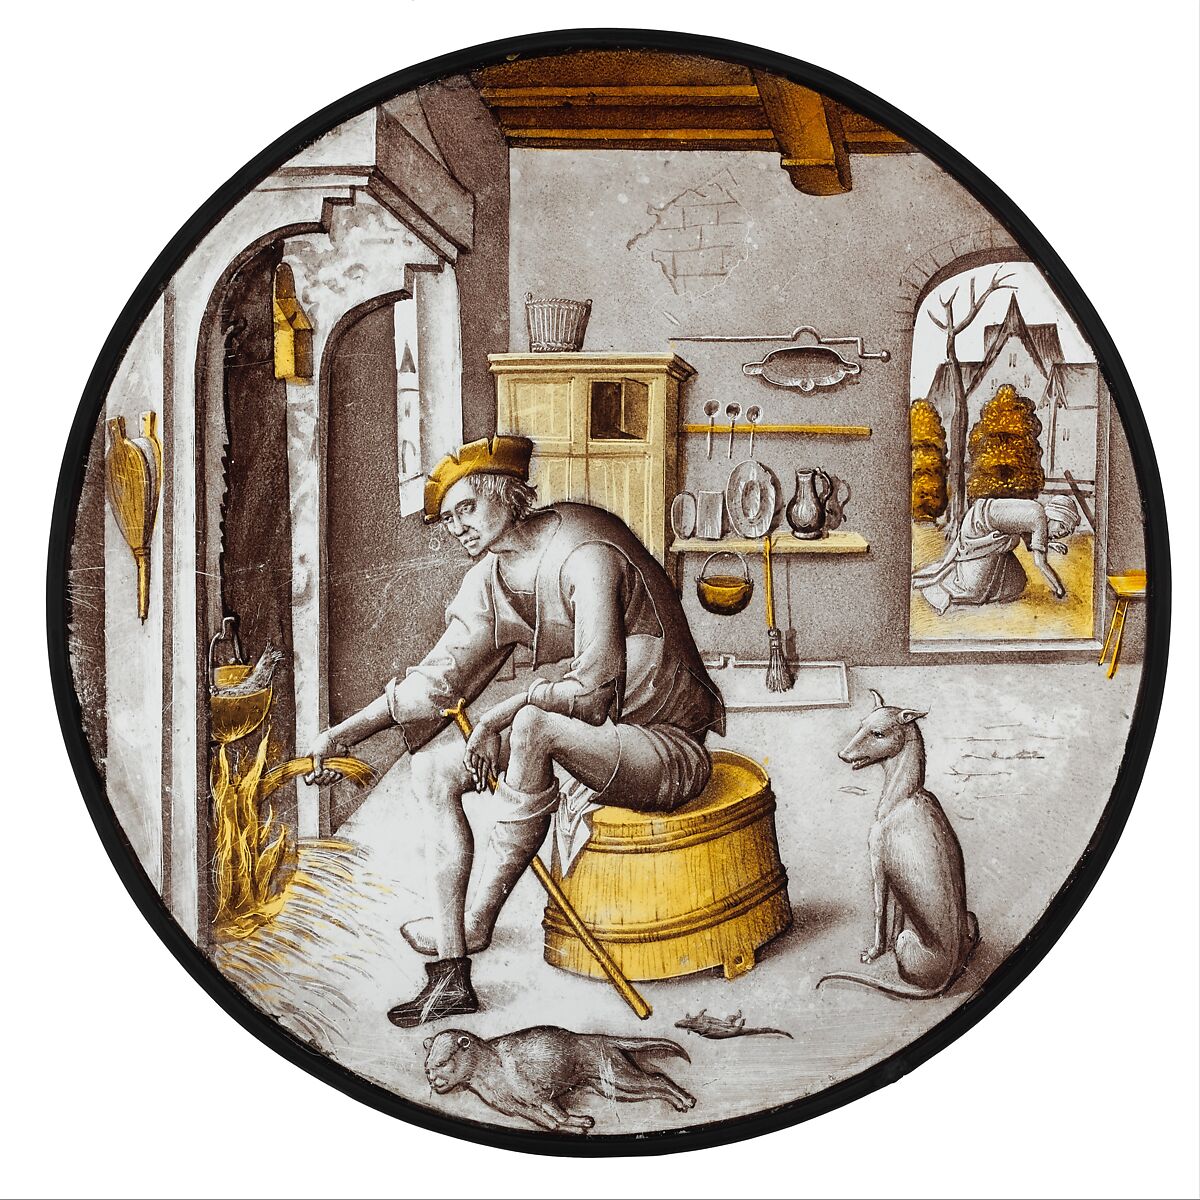 Sorgheloos ("Carefree") in Poverty, Colorless glass, vitreous paint and silver stain, Netherlandish 